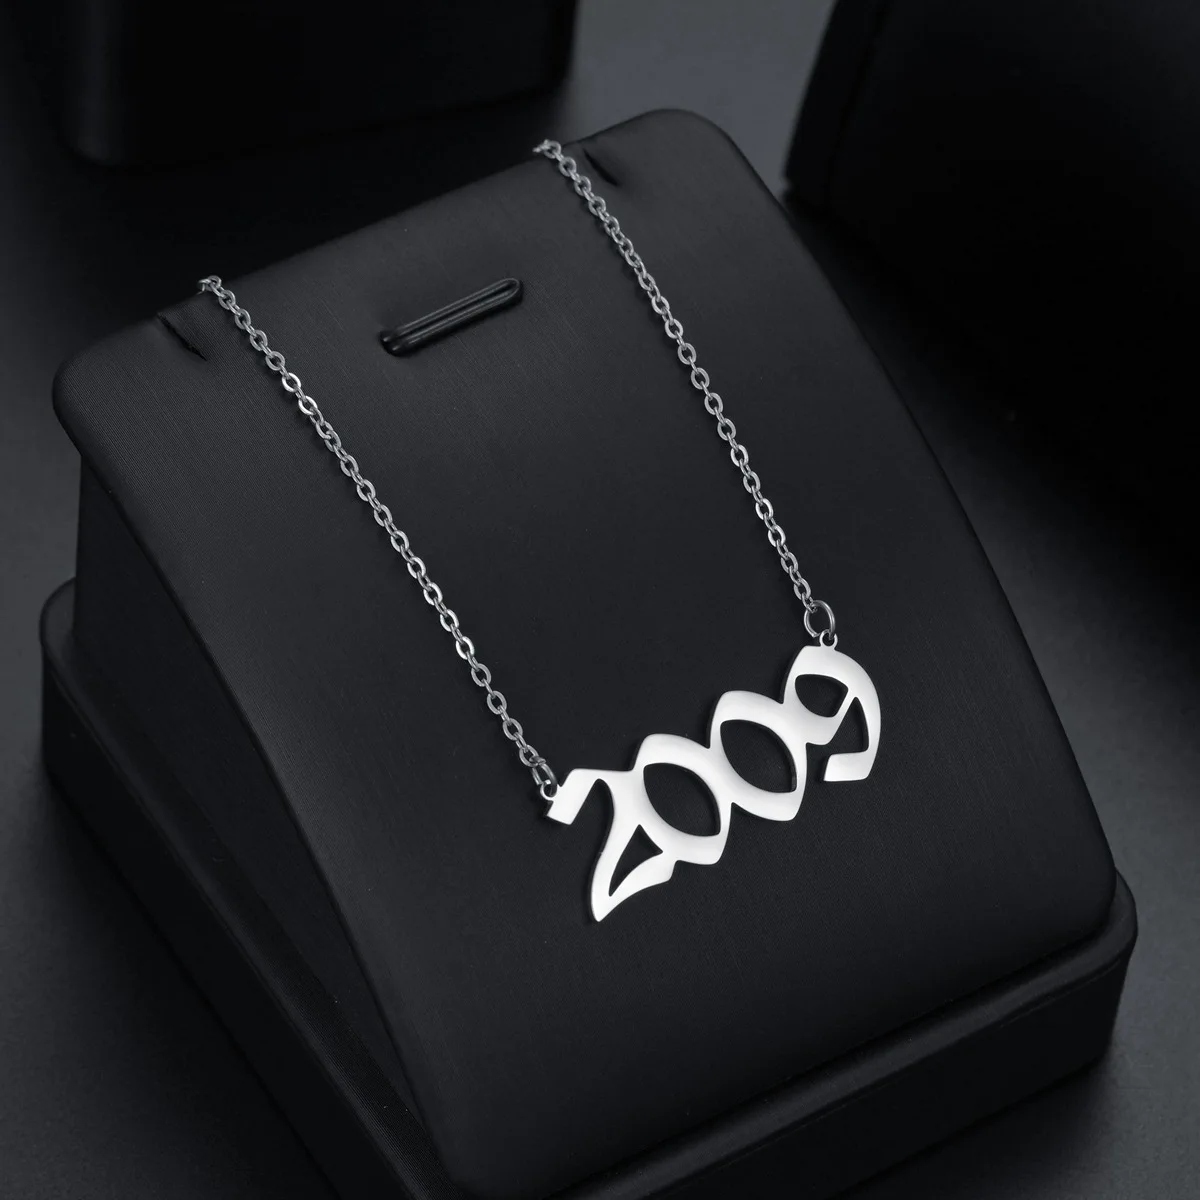 ERQI Personalize Year Number Necklaces for Women Birth Special Date 1995 1997 1998 2000 2010 Birthday Gift From 1991 to 2022 images - 6